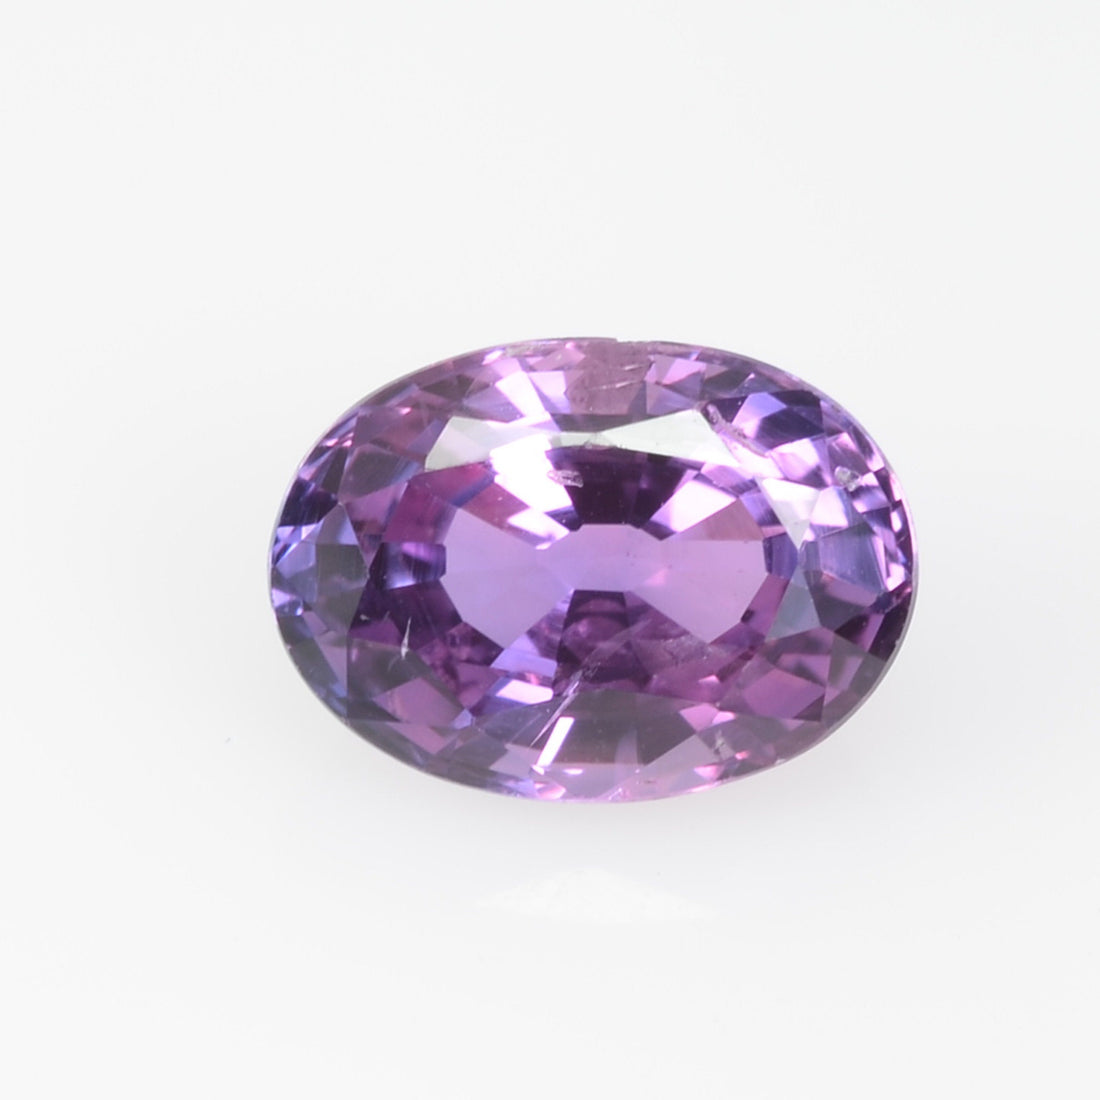 1.06 cts Natural Purple Sapphire Loose Gemstone Oval Cut